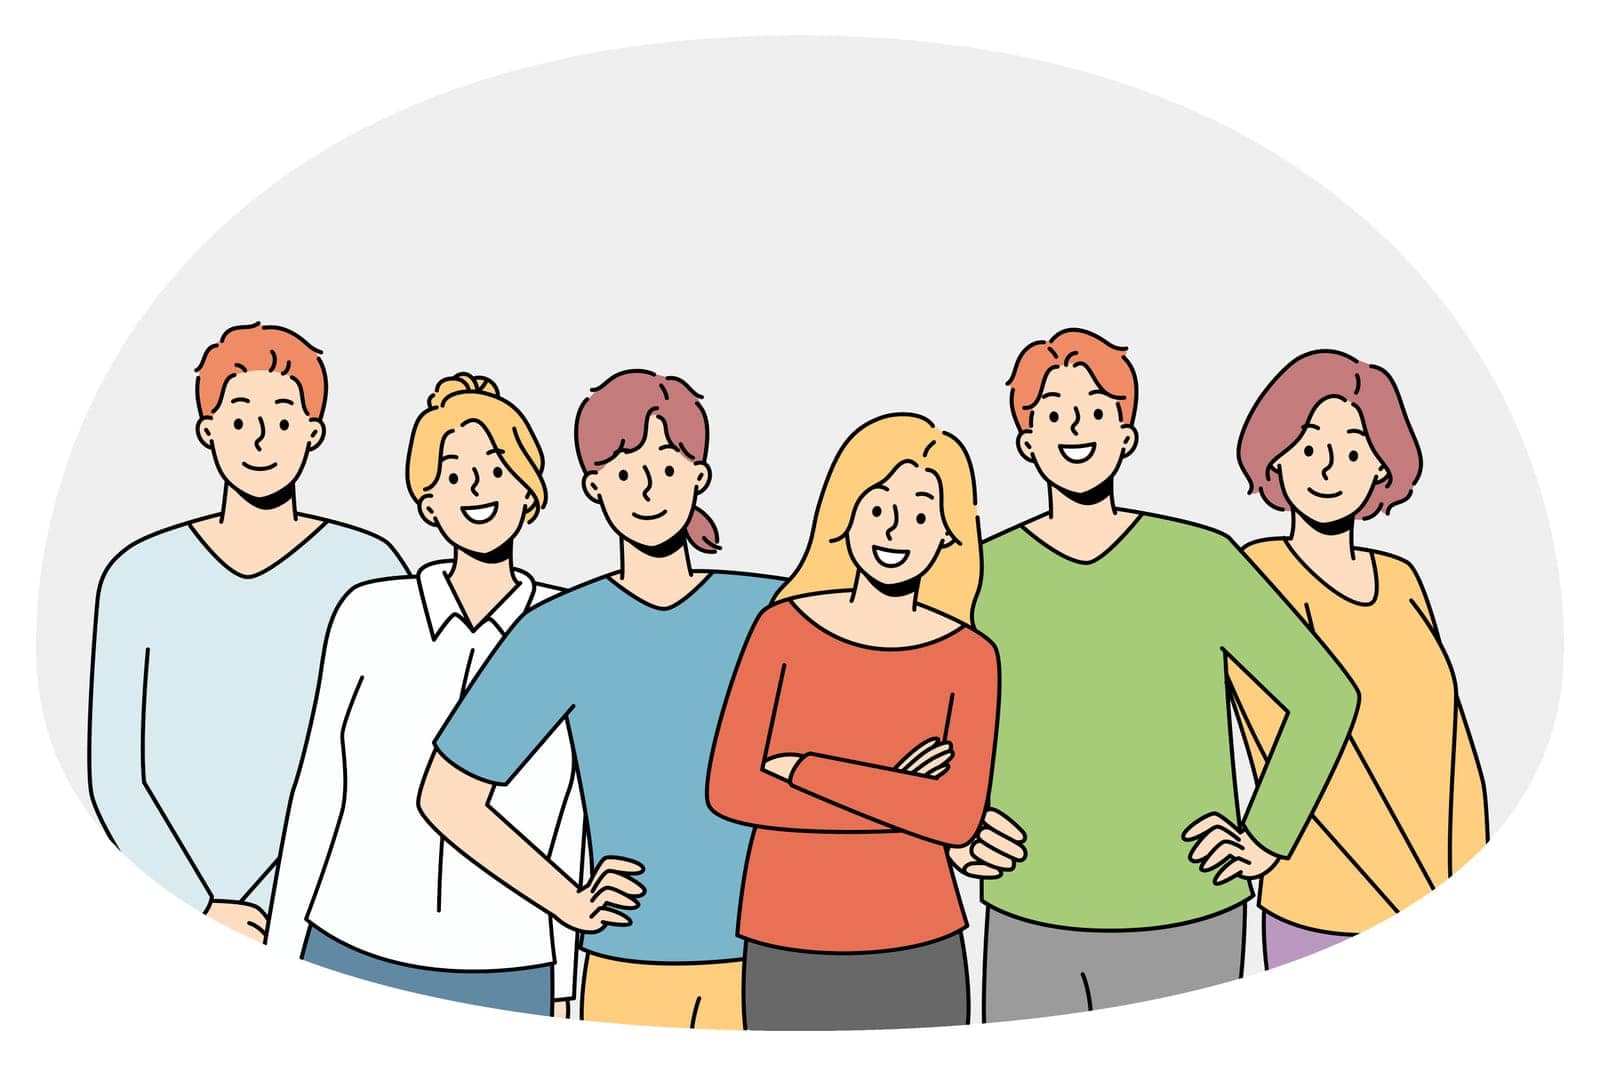 Diverse young people standing together showing friendship and support. Multiethnic youth group togetherness. Teamwork and cooperation. Vector illustration.